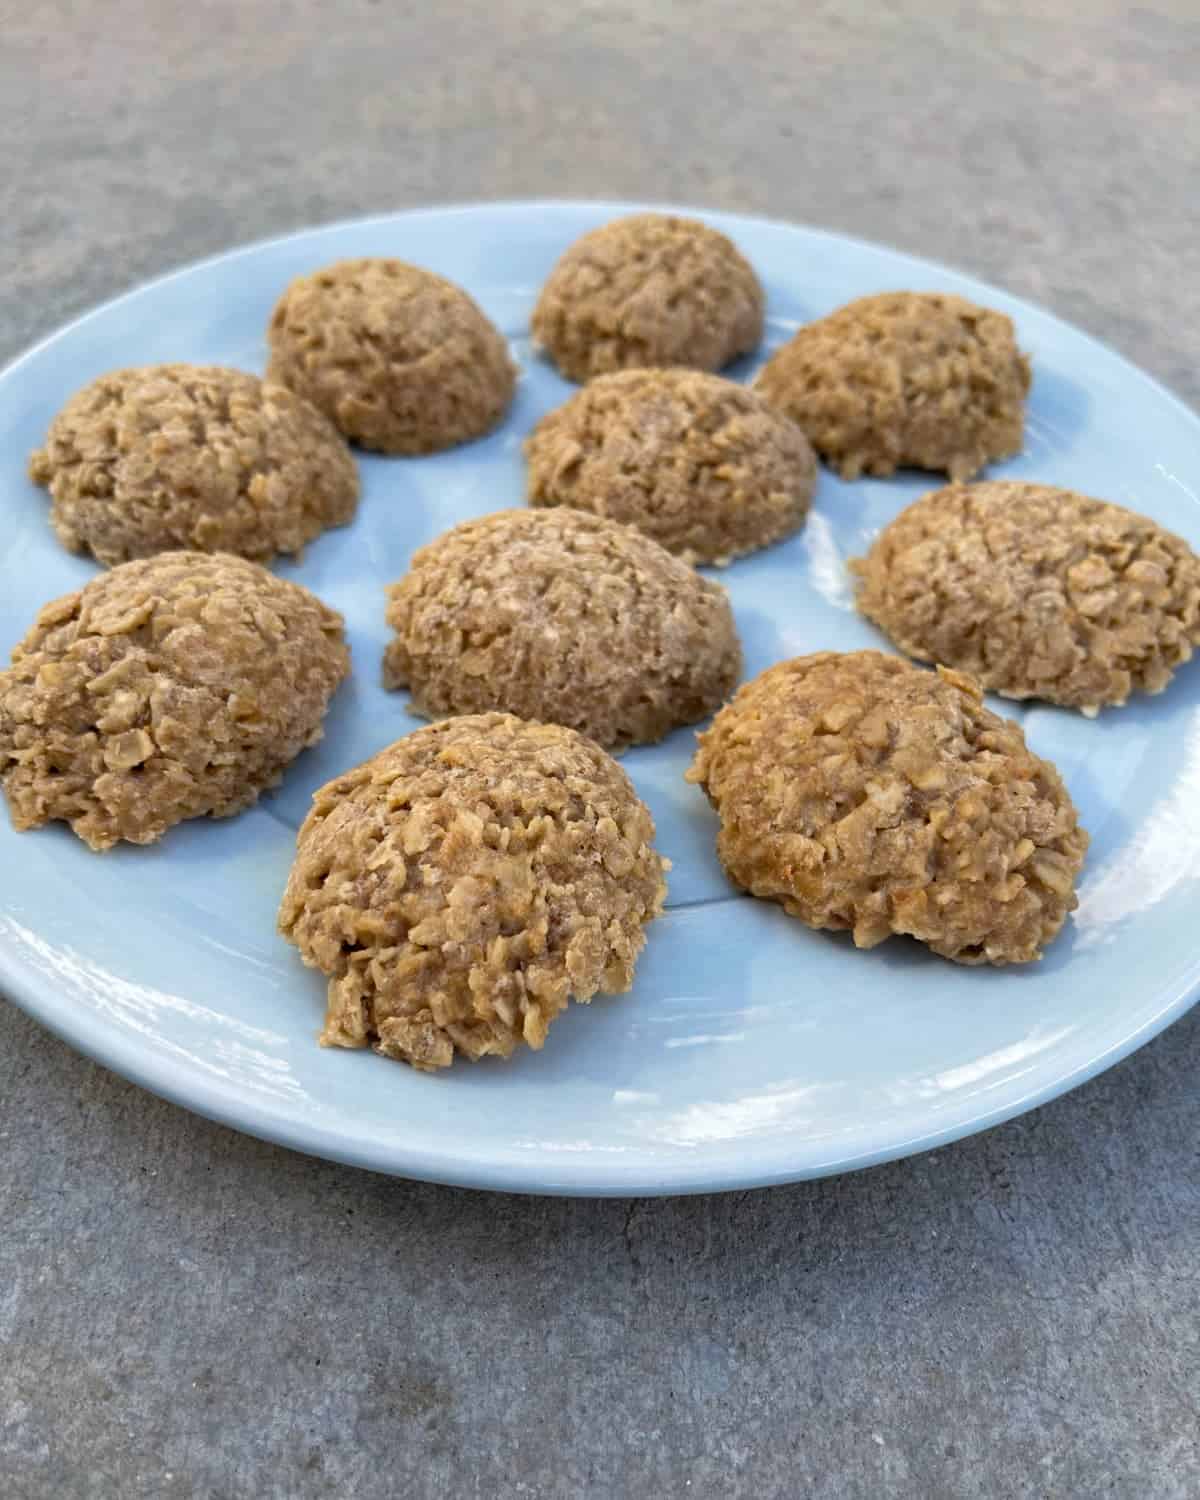 Peanut butter oat no-bake cookies on small blue plate.